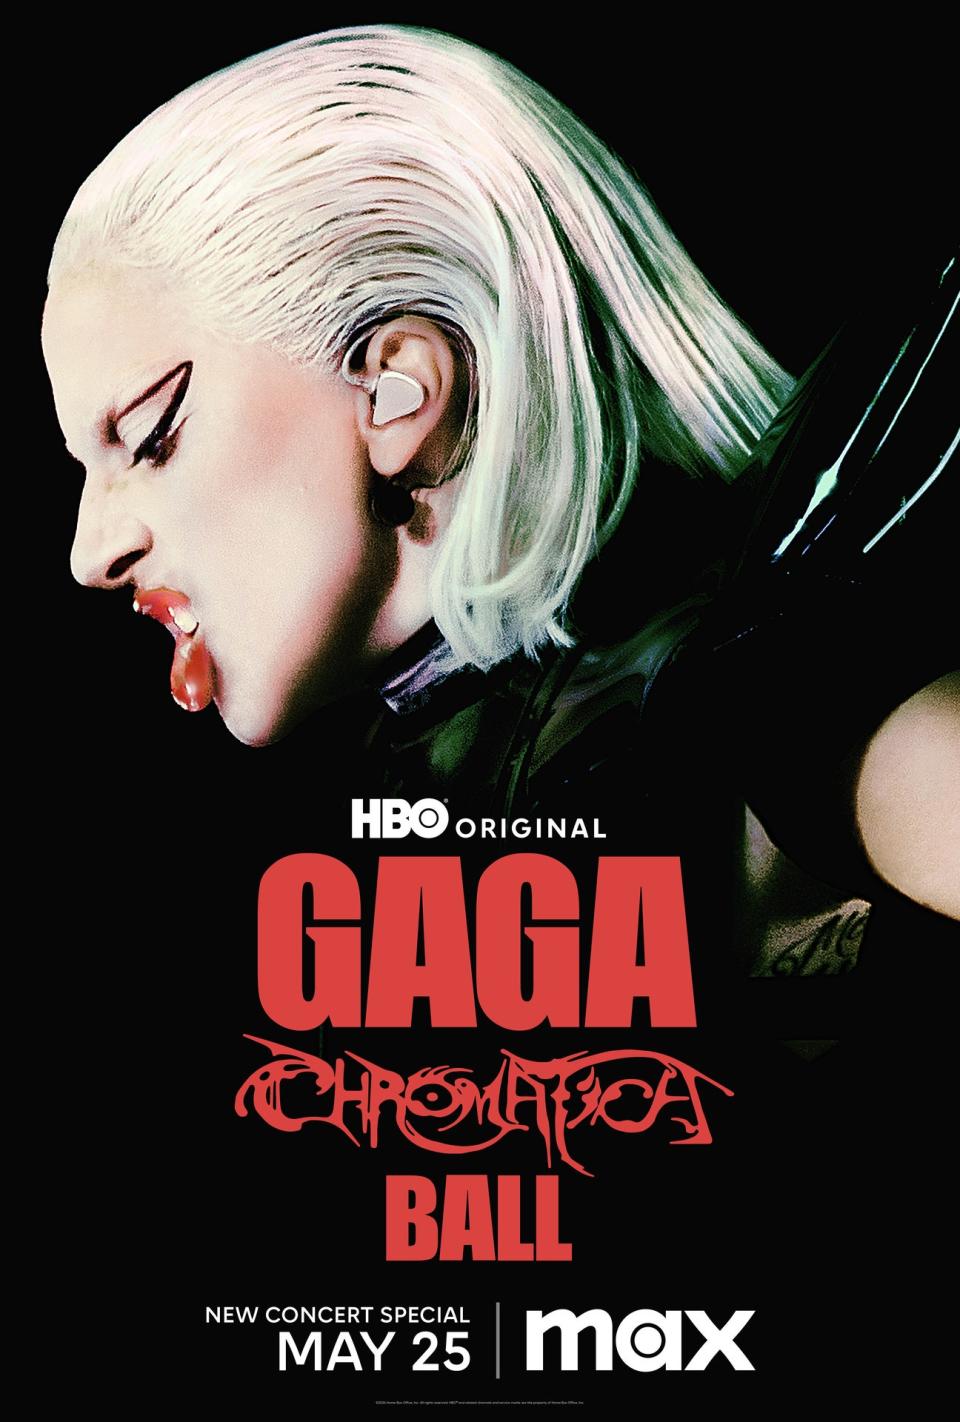 <h1 class="title">Lady Gaga - Gaga Chromatica Ball</h1><cite class="credit">Photo courtesy of [HBO](https://www.hbo.com/)</cite>